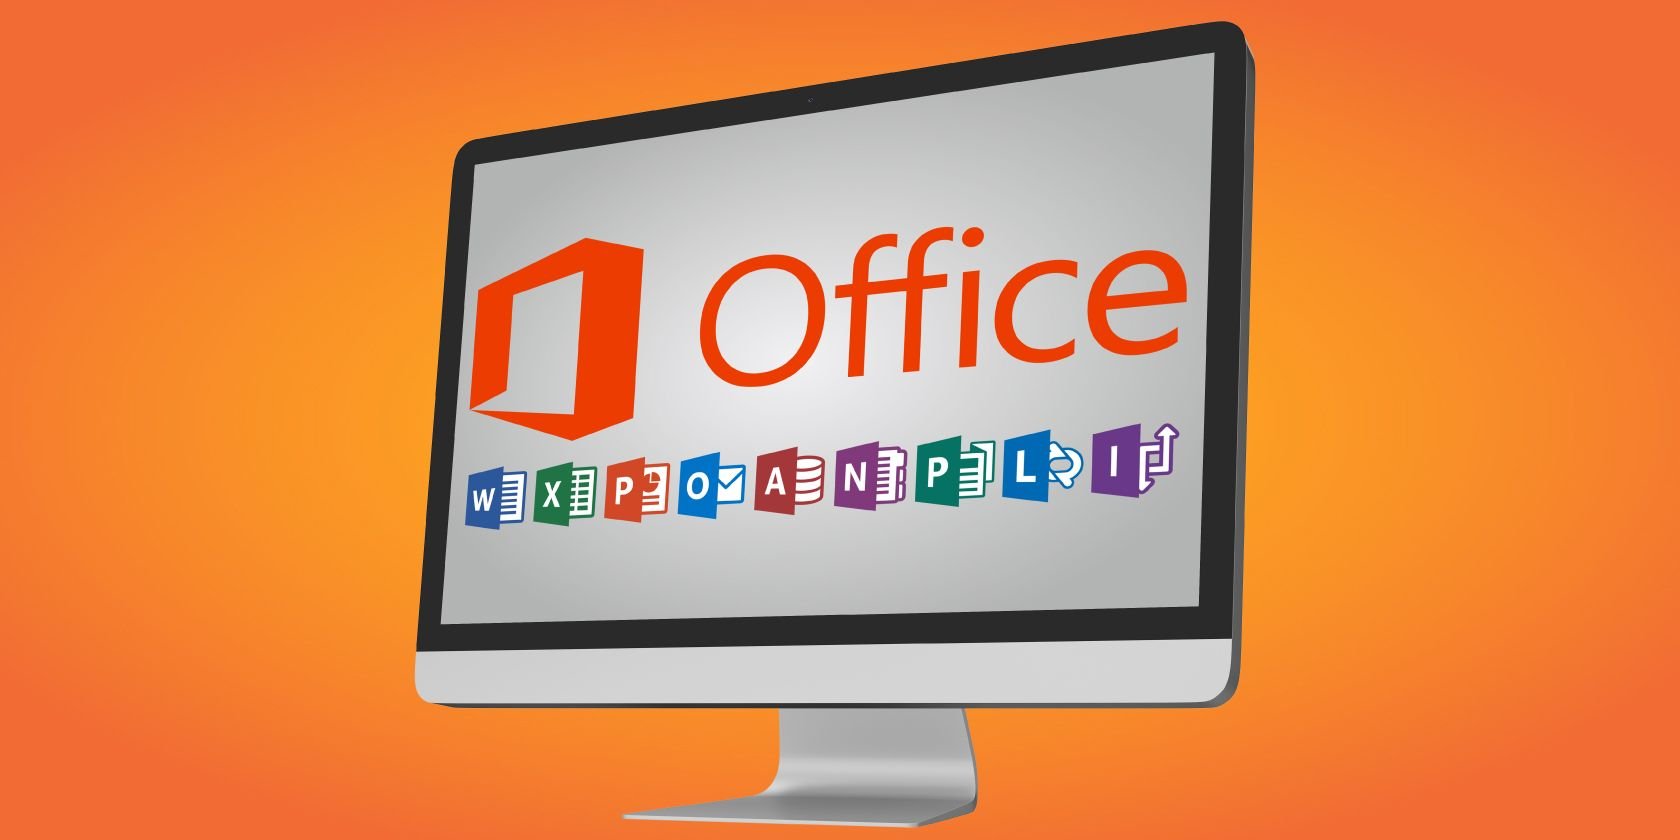 Buy Microsoft Office With the Best Discount: Here’s How